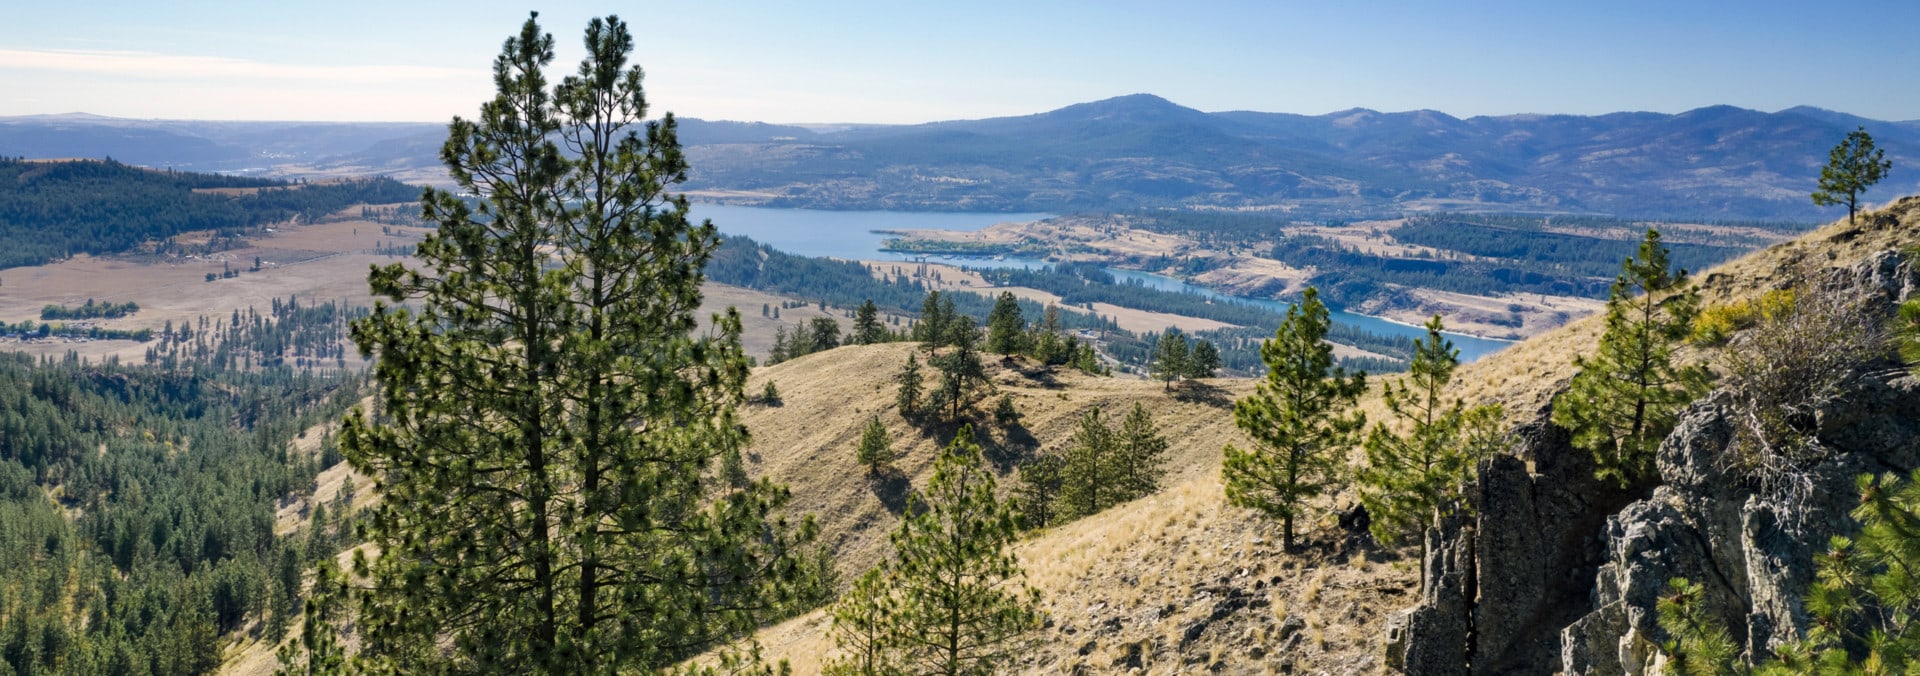 washington ranch land for sale lilienthal mountain west